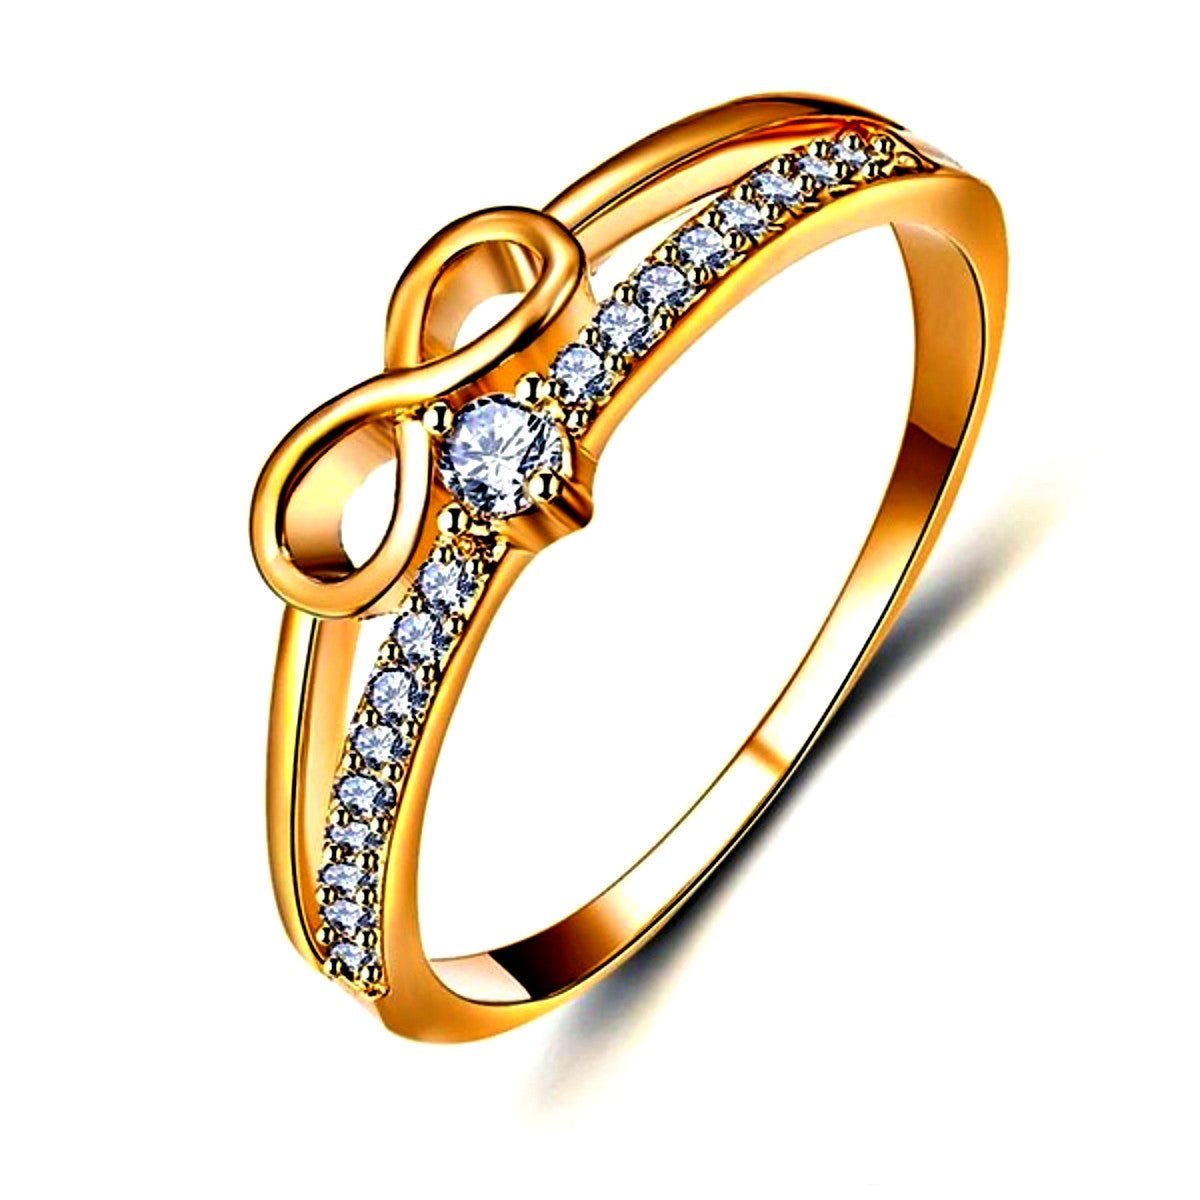 Buy quality 916 Gold Love Design Ring in Ahmedabad